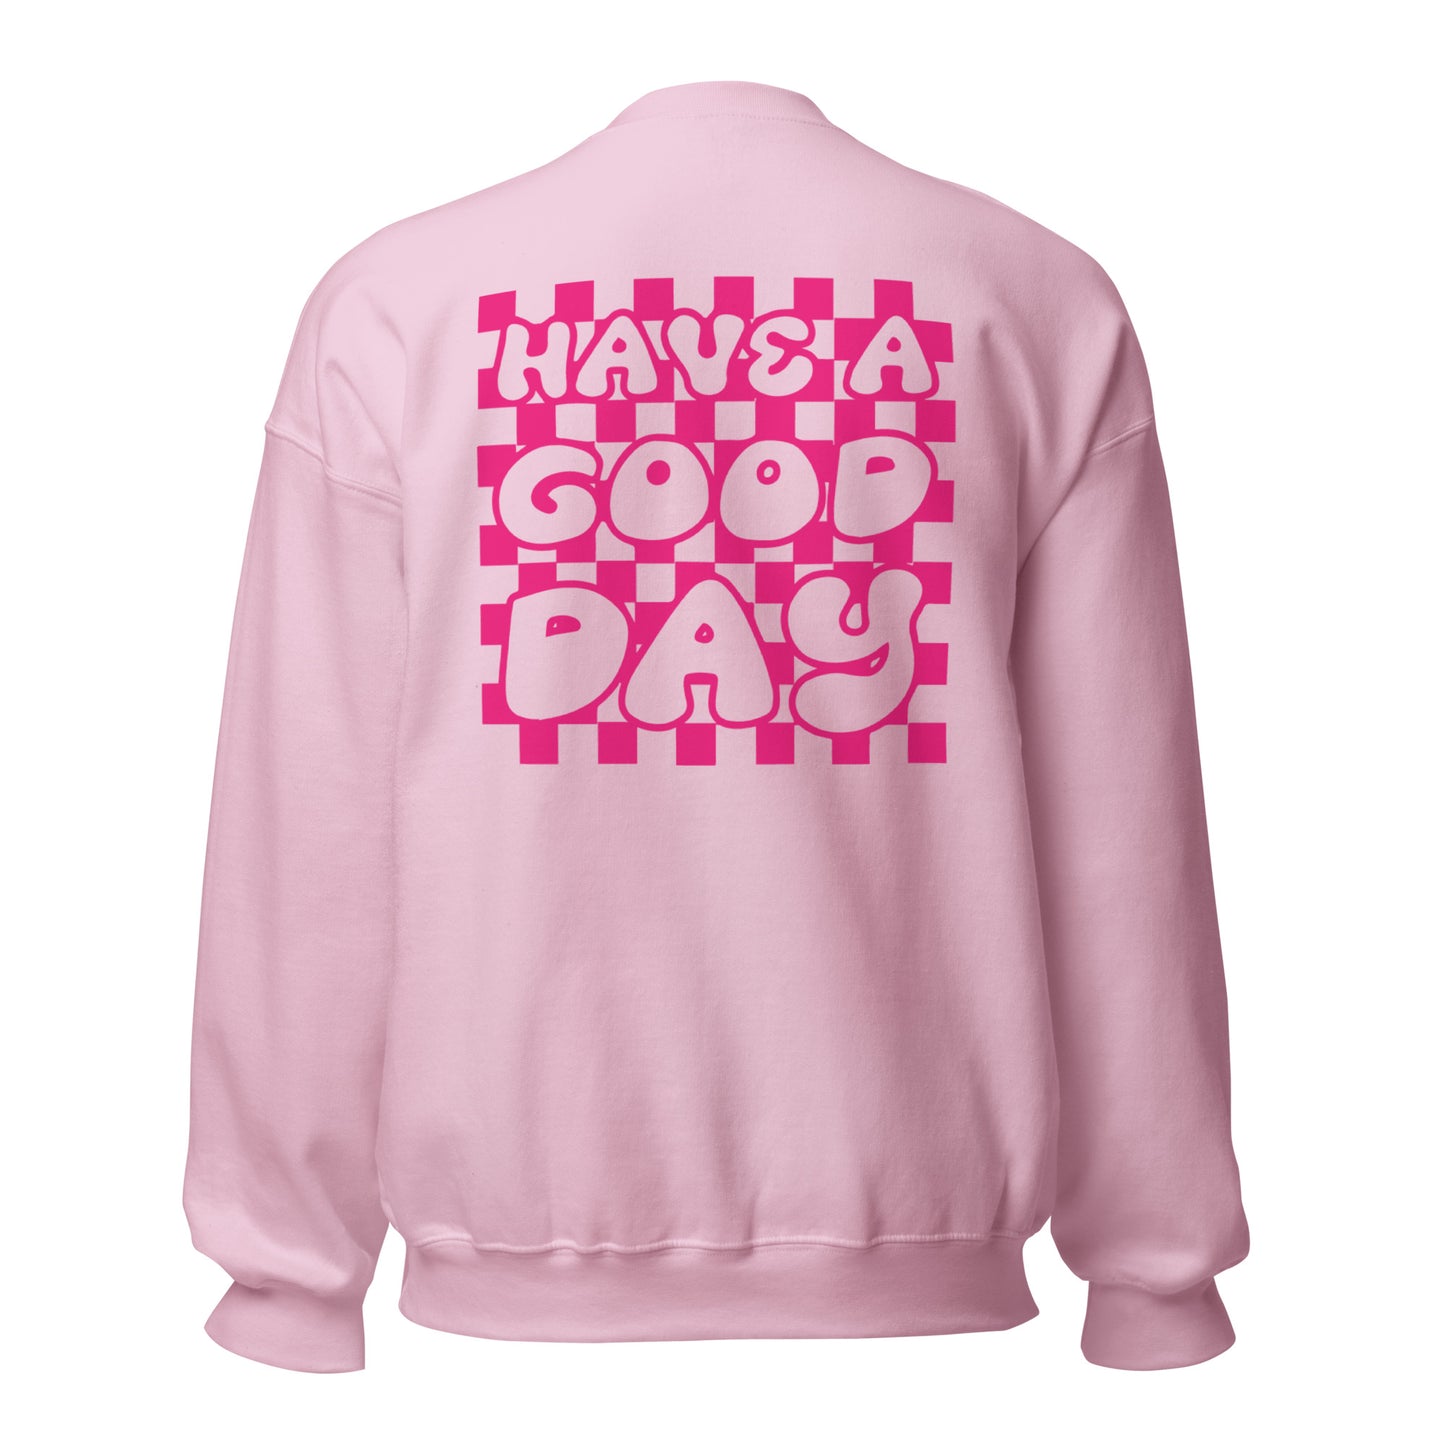 Women's Smiley Face Light Pink Sweatshirt, Hot Pink Text. "Have A Nice Day" on Back